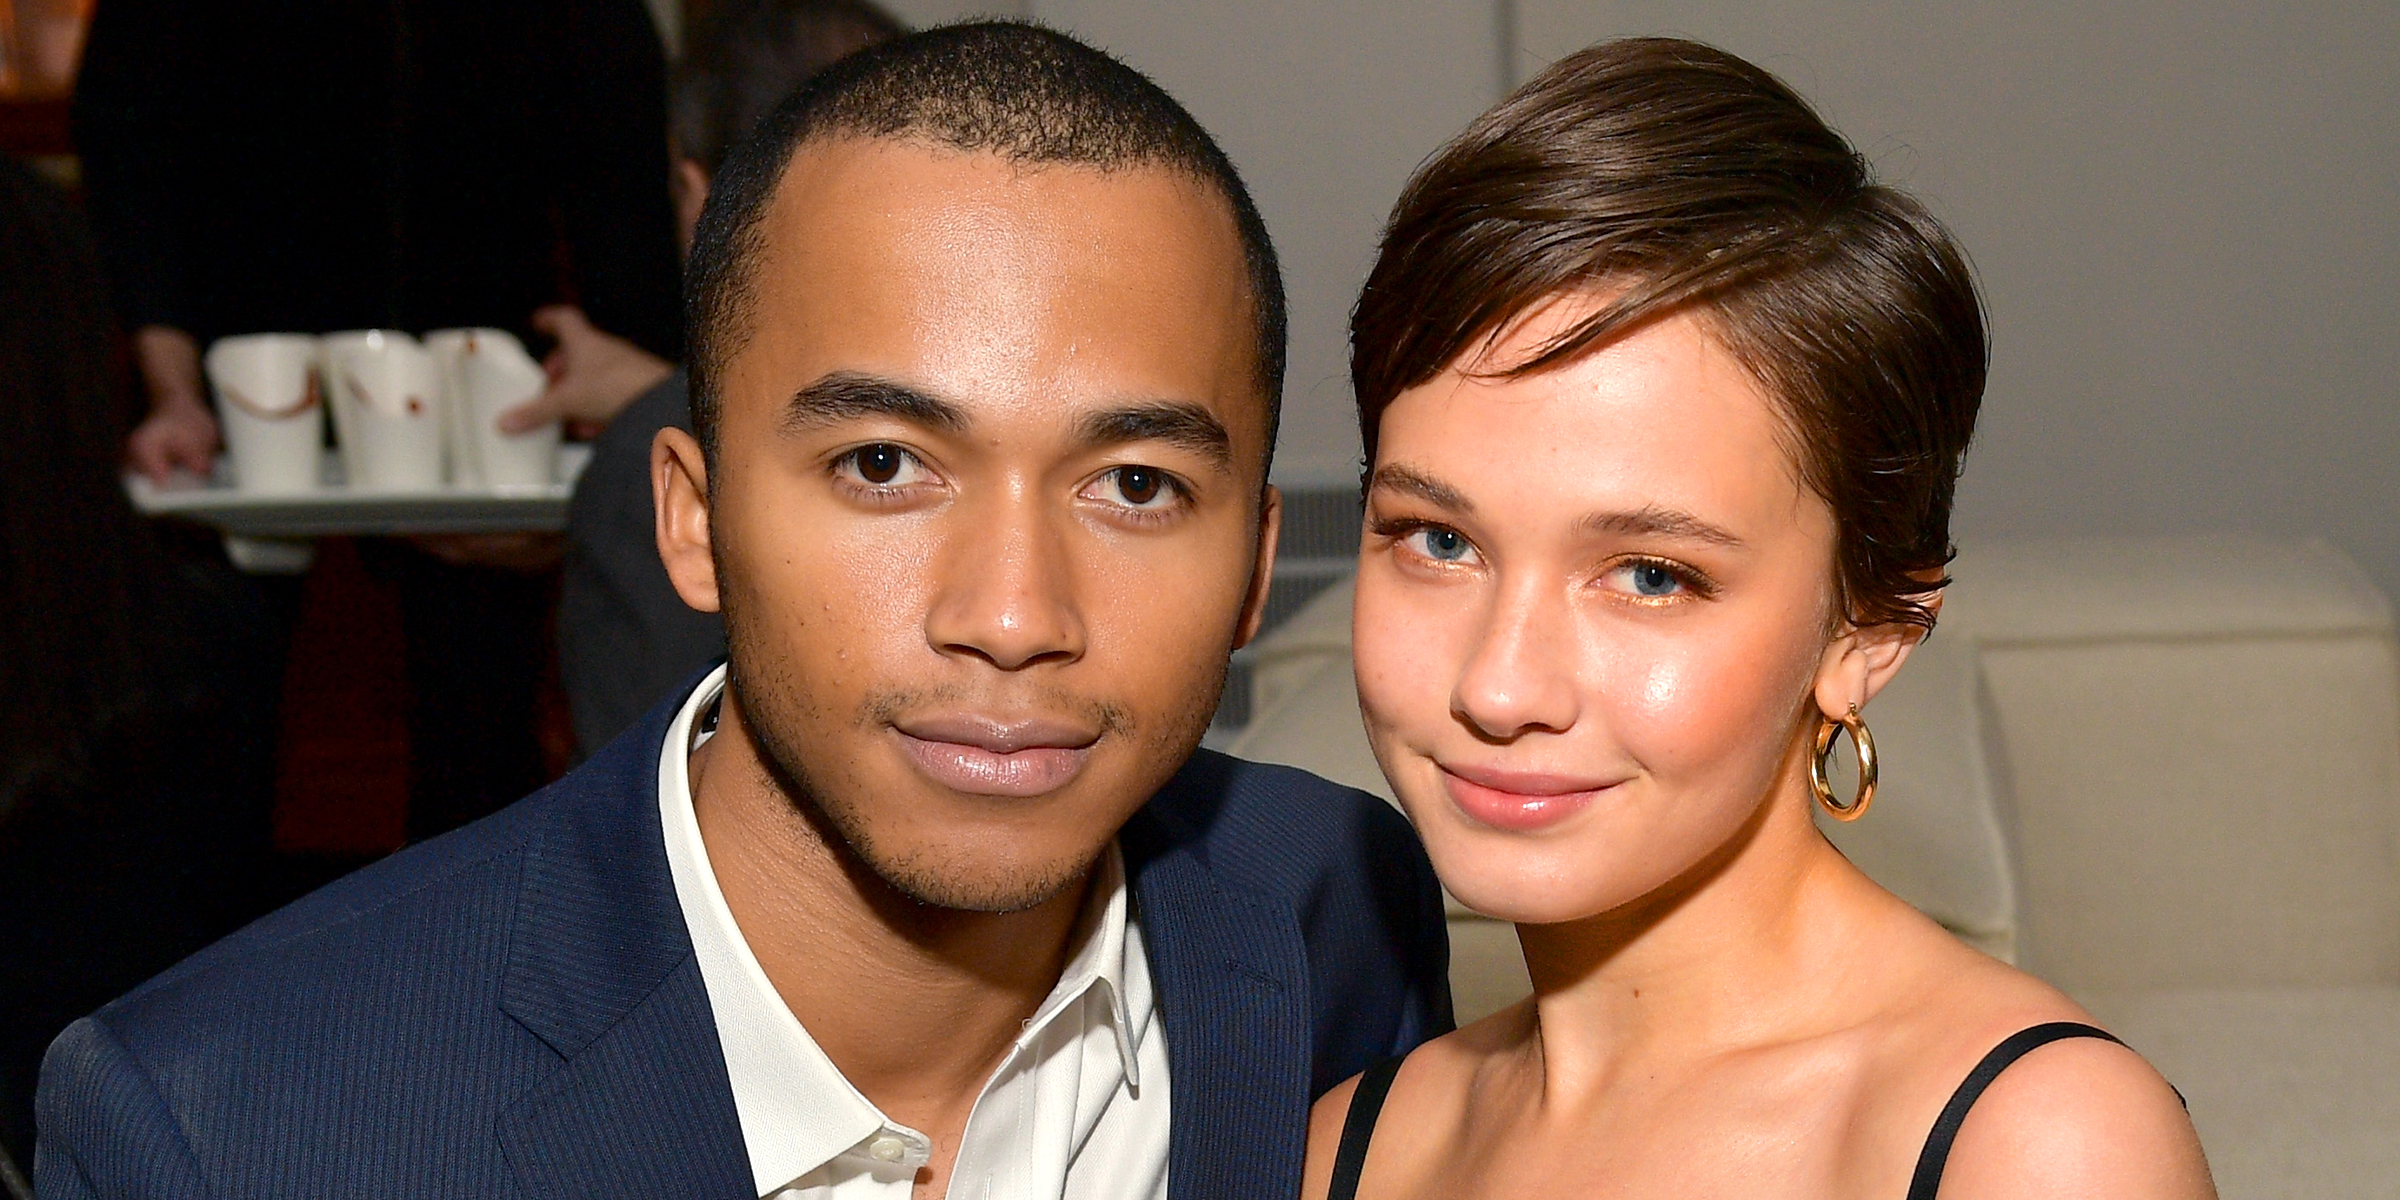 Raymond Alexander Cham Jr. and Cailee Spaeny | Source: Getty Images